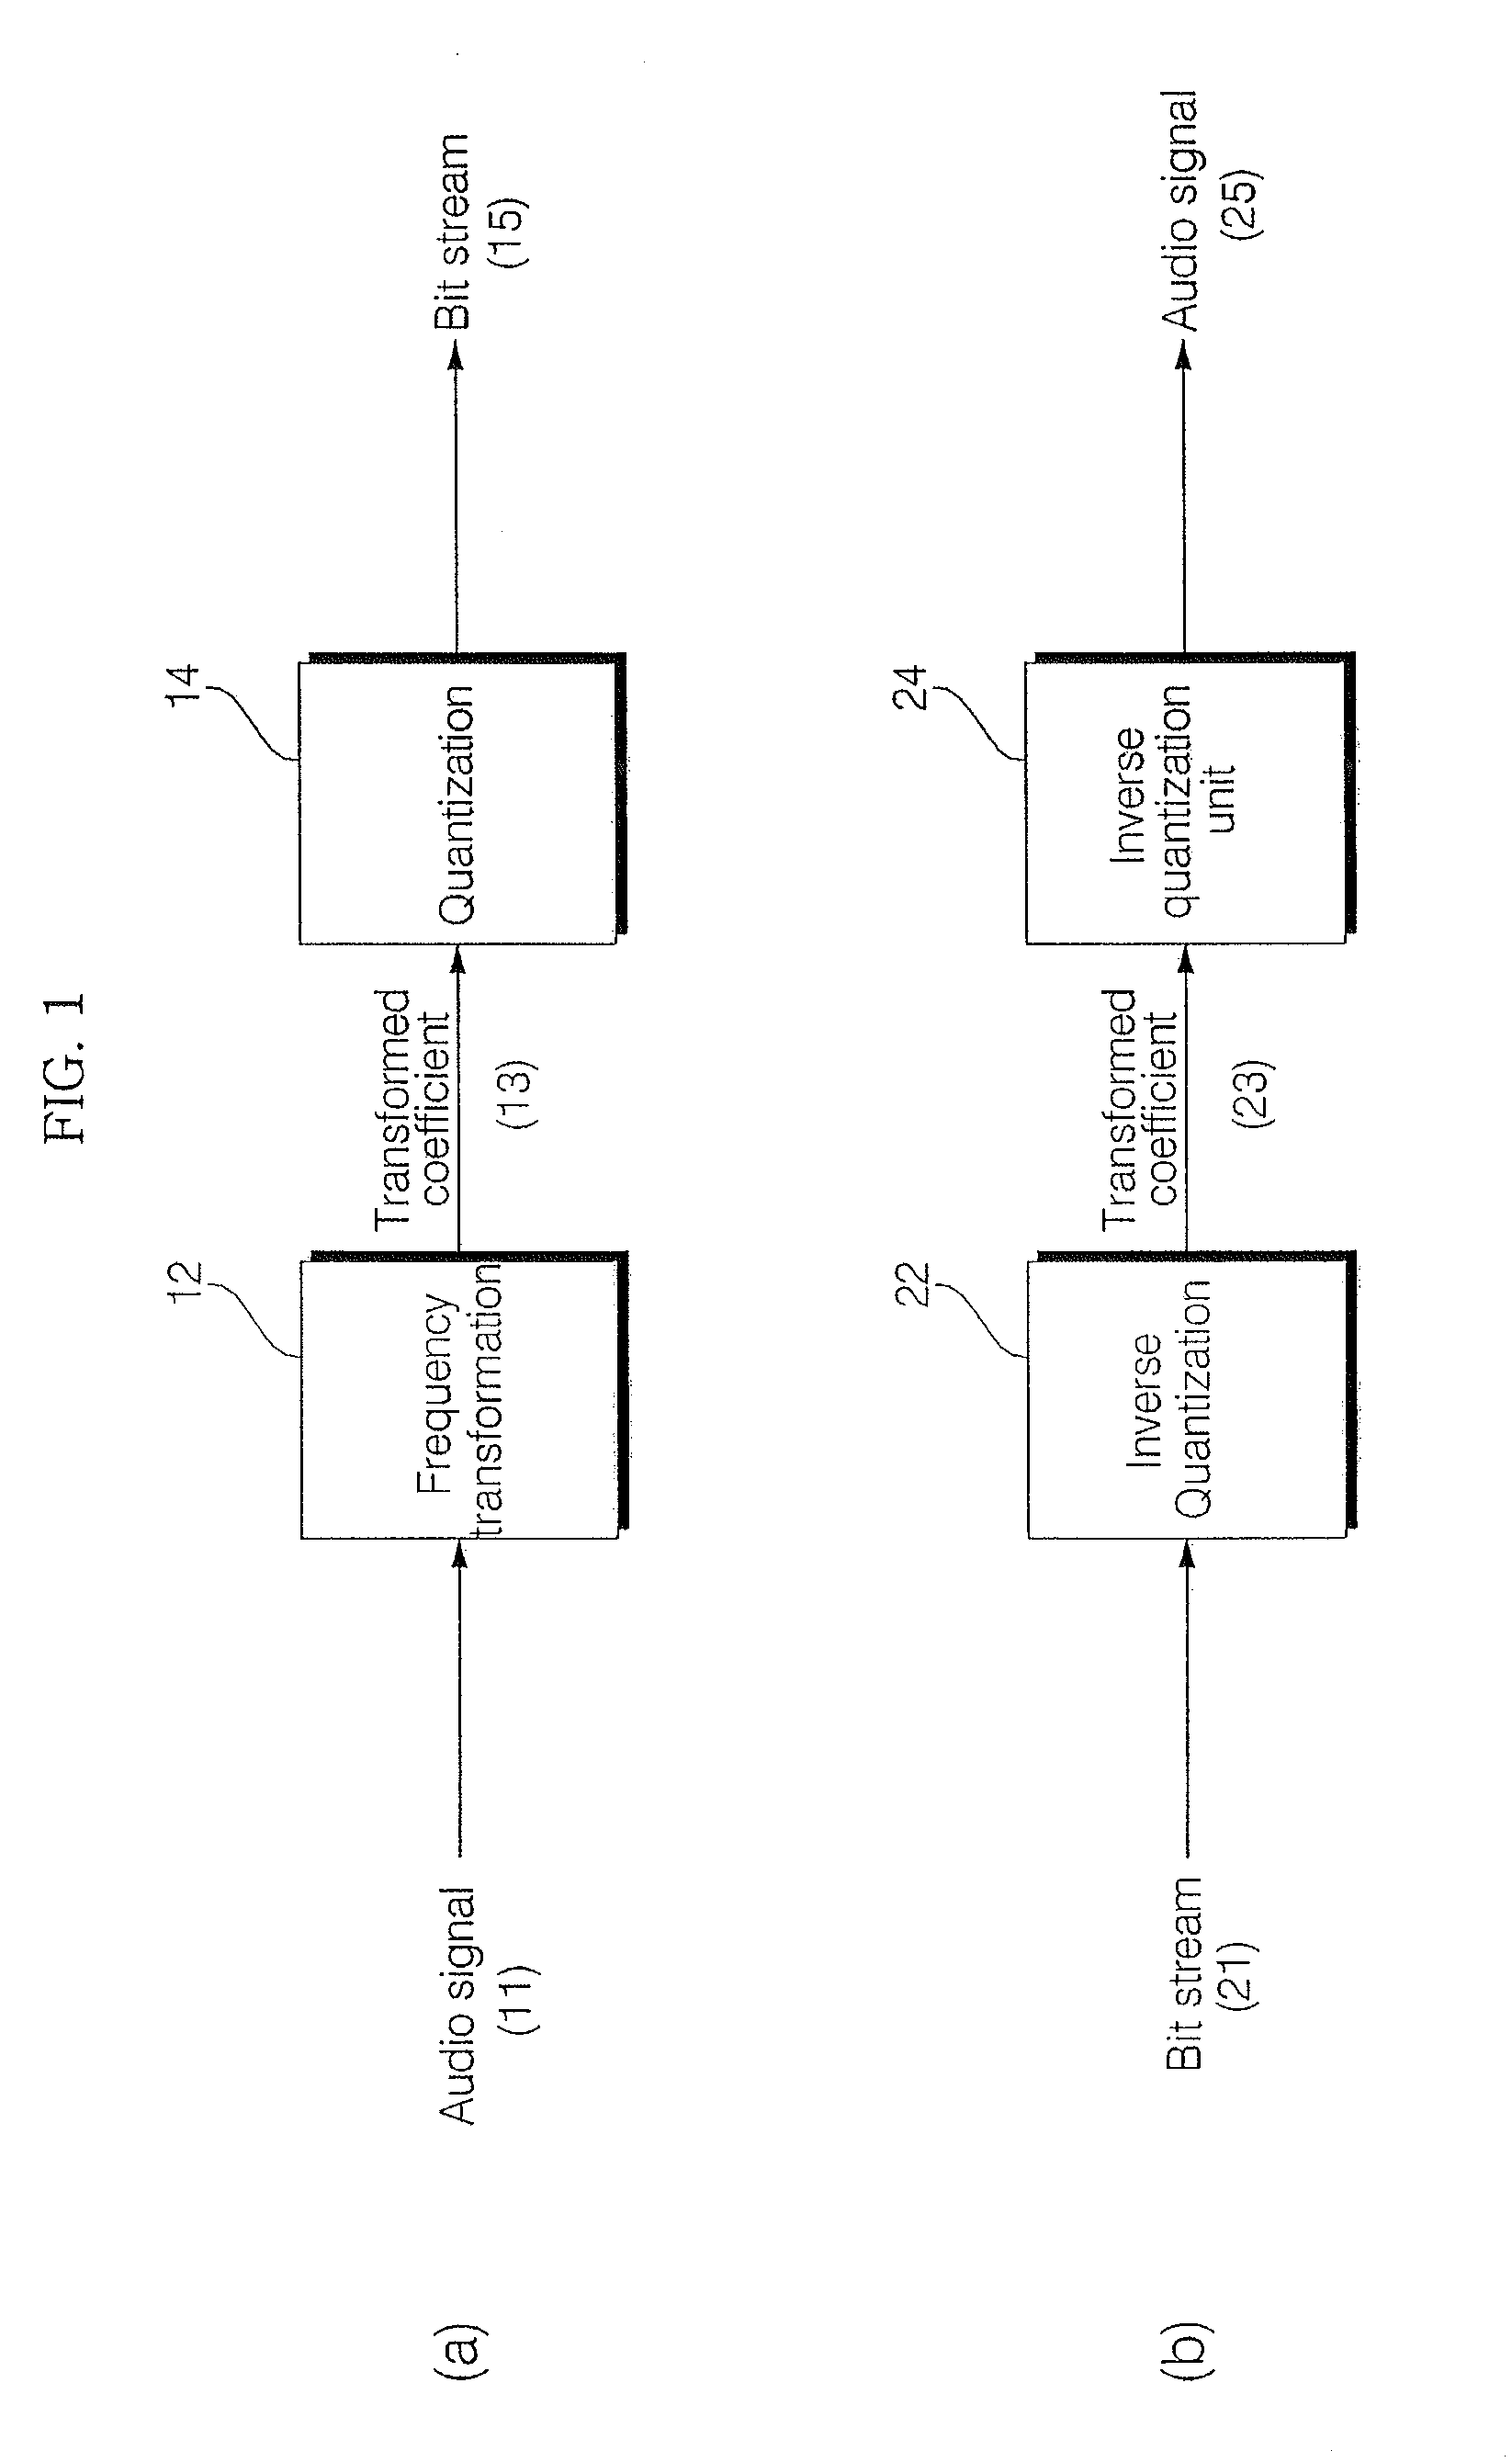 Method and apparatus for adaptive sub-band allocation of spectral coefficients